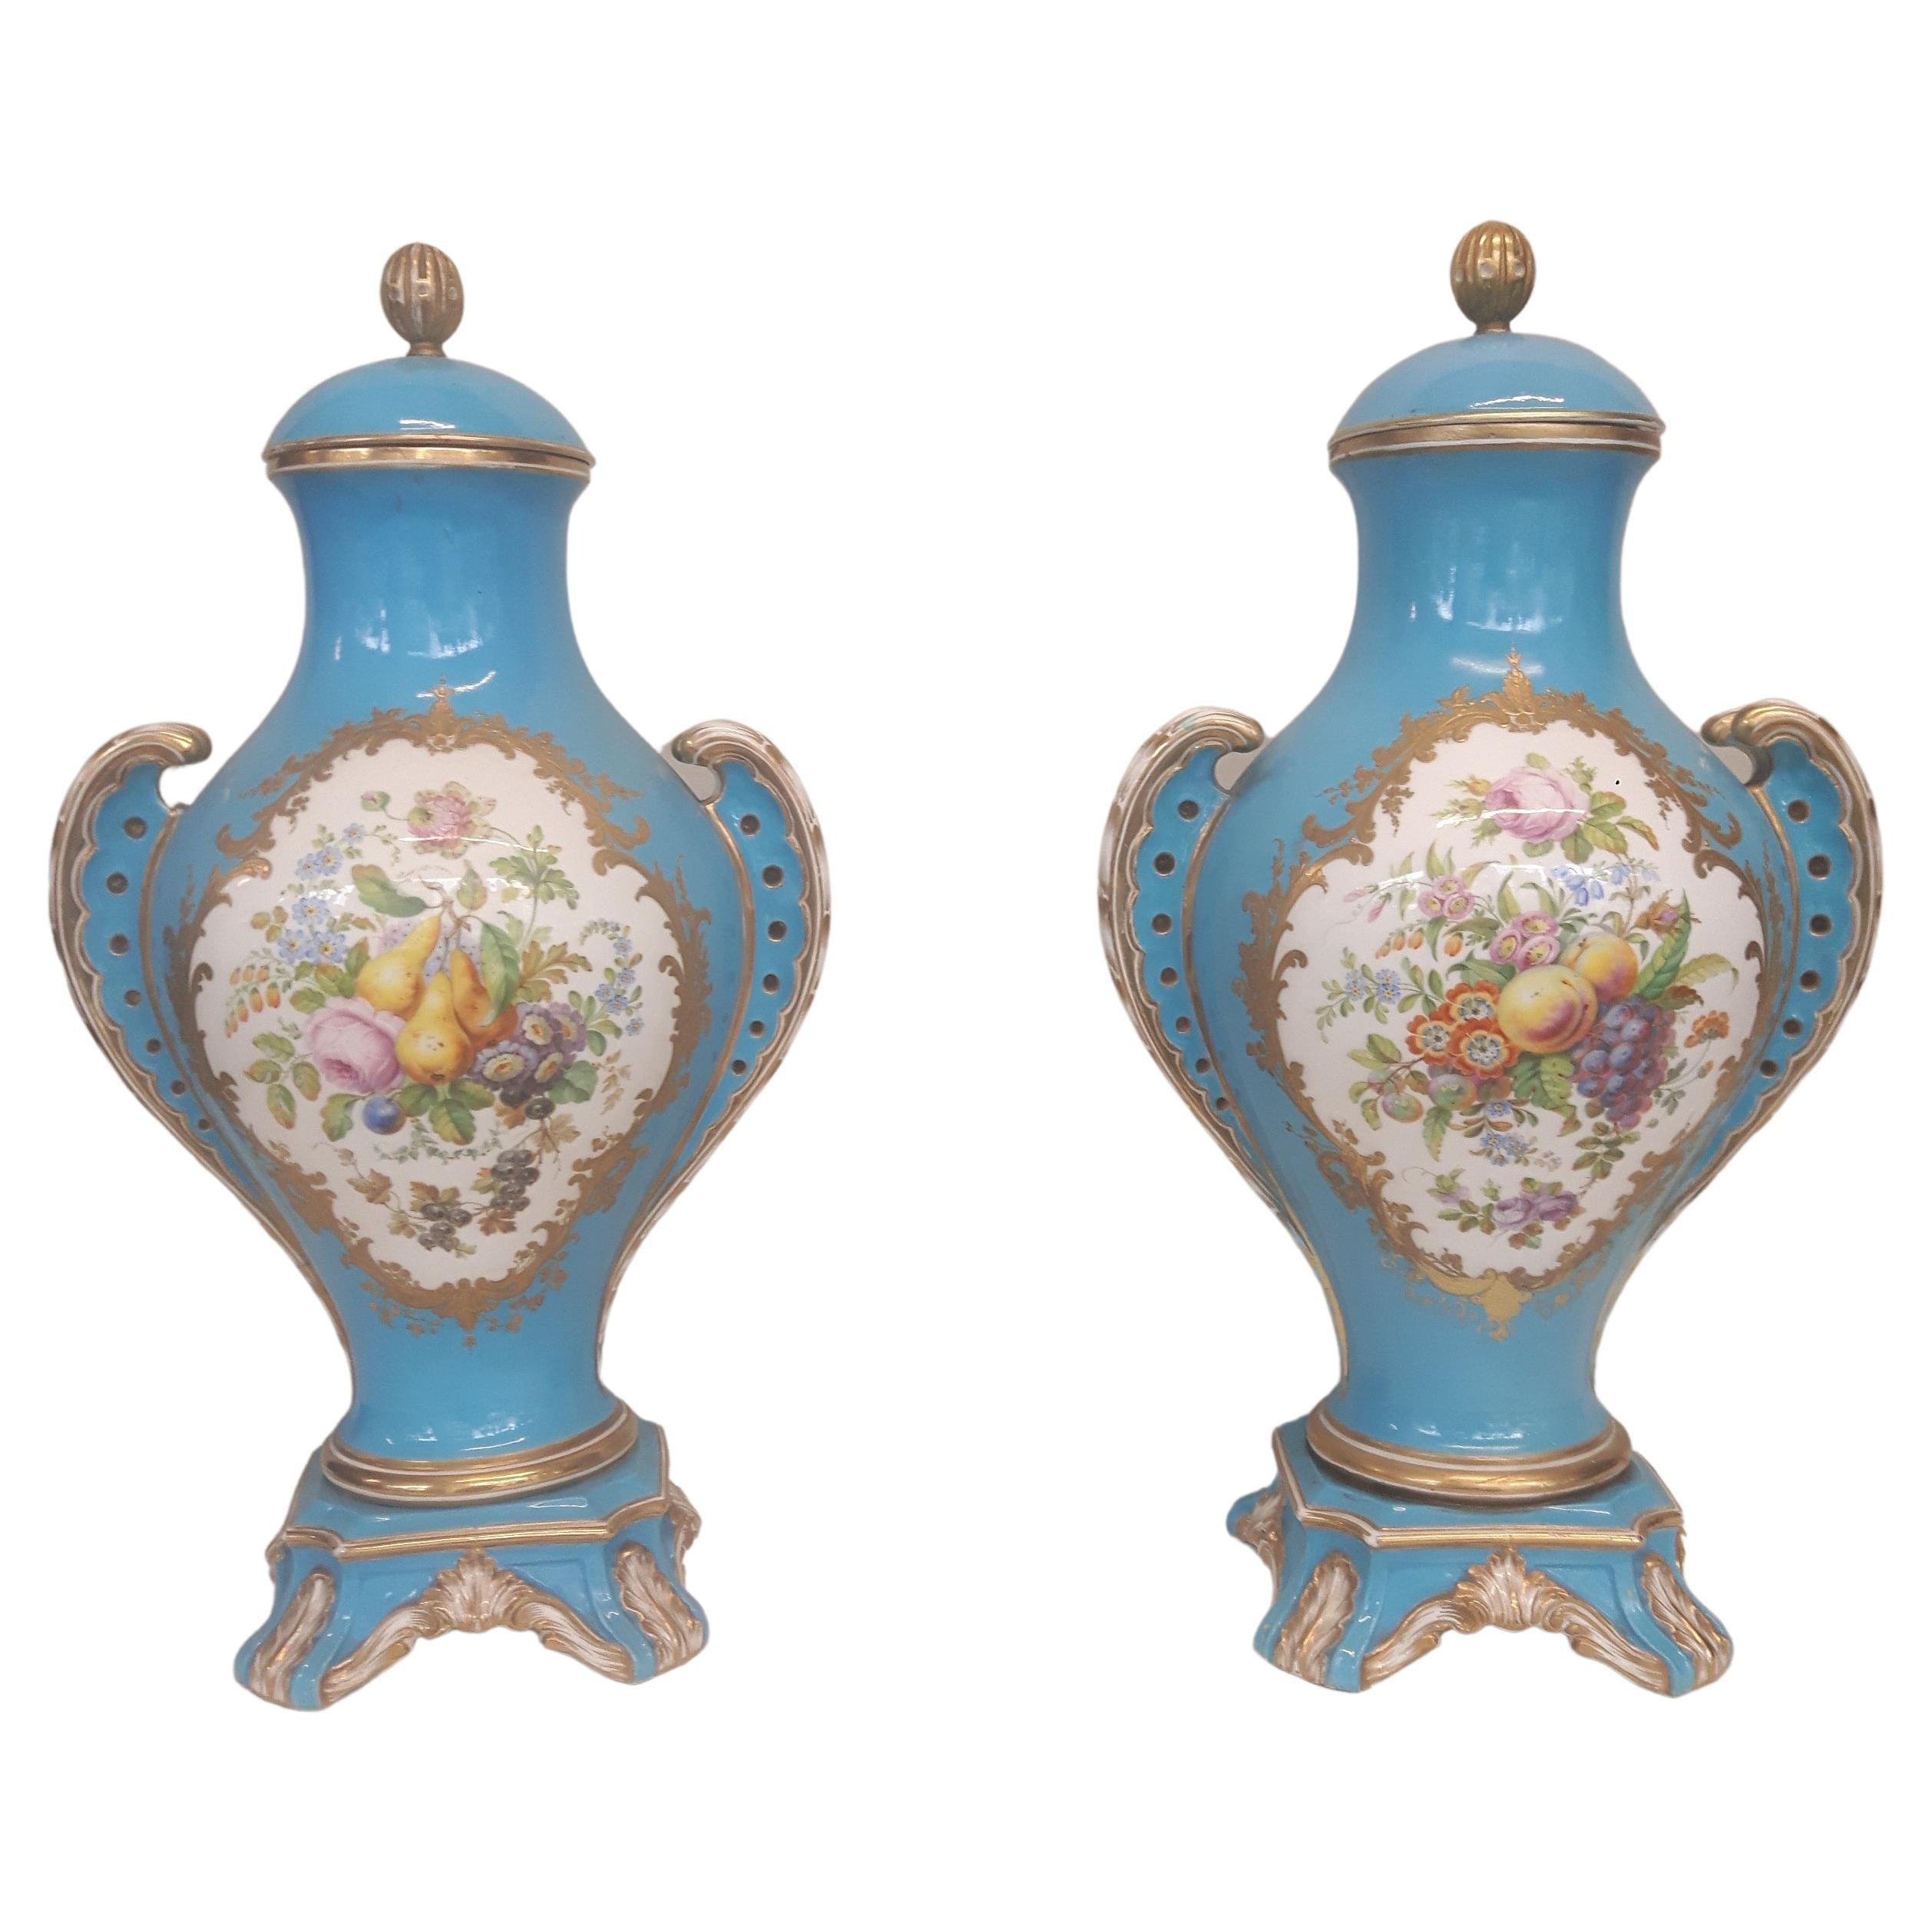 Pair of 19th Century Severe Style Vases